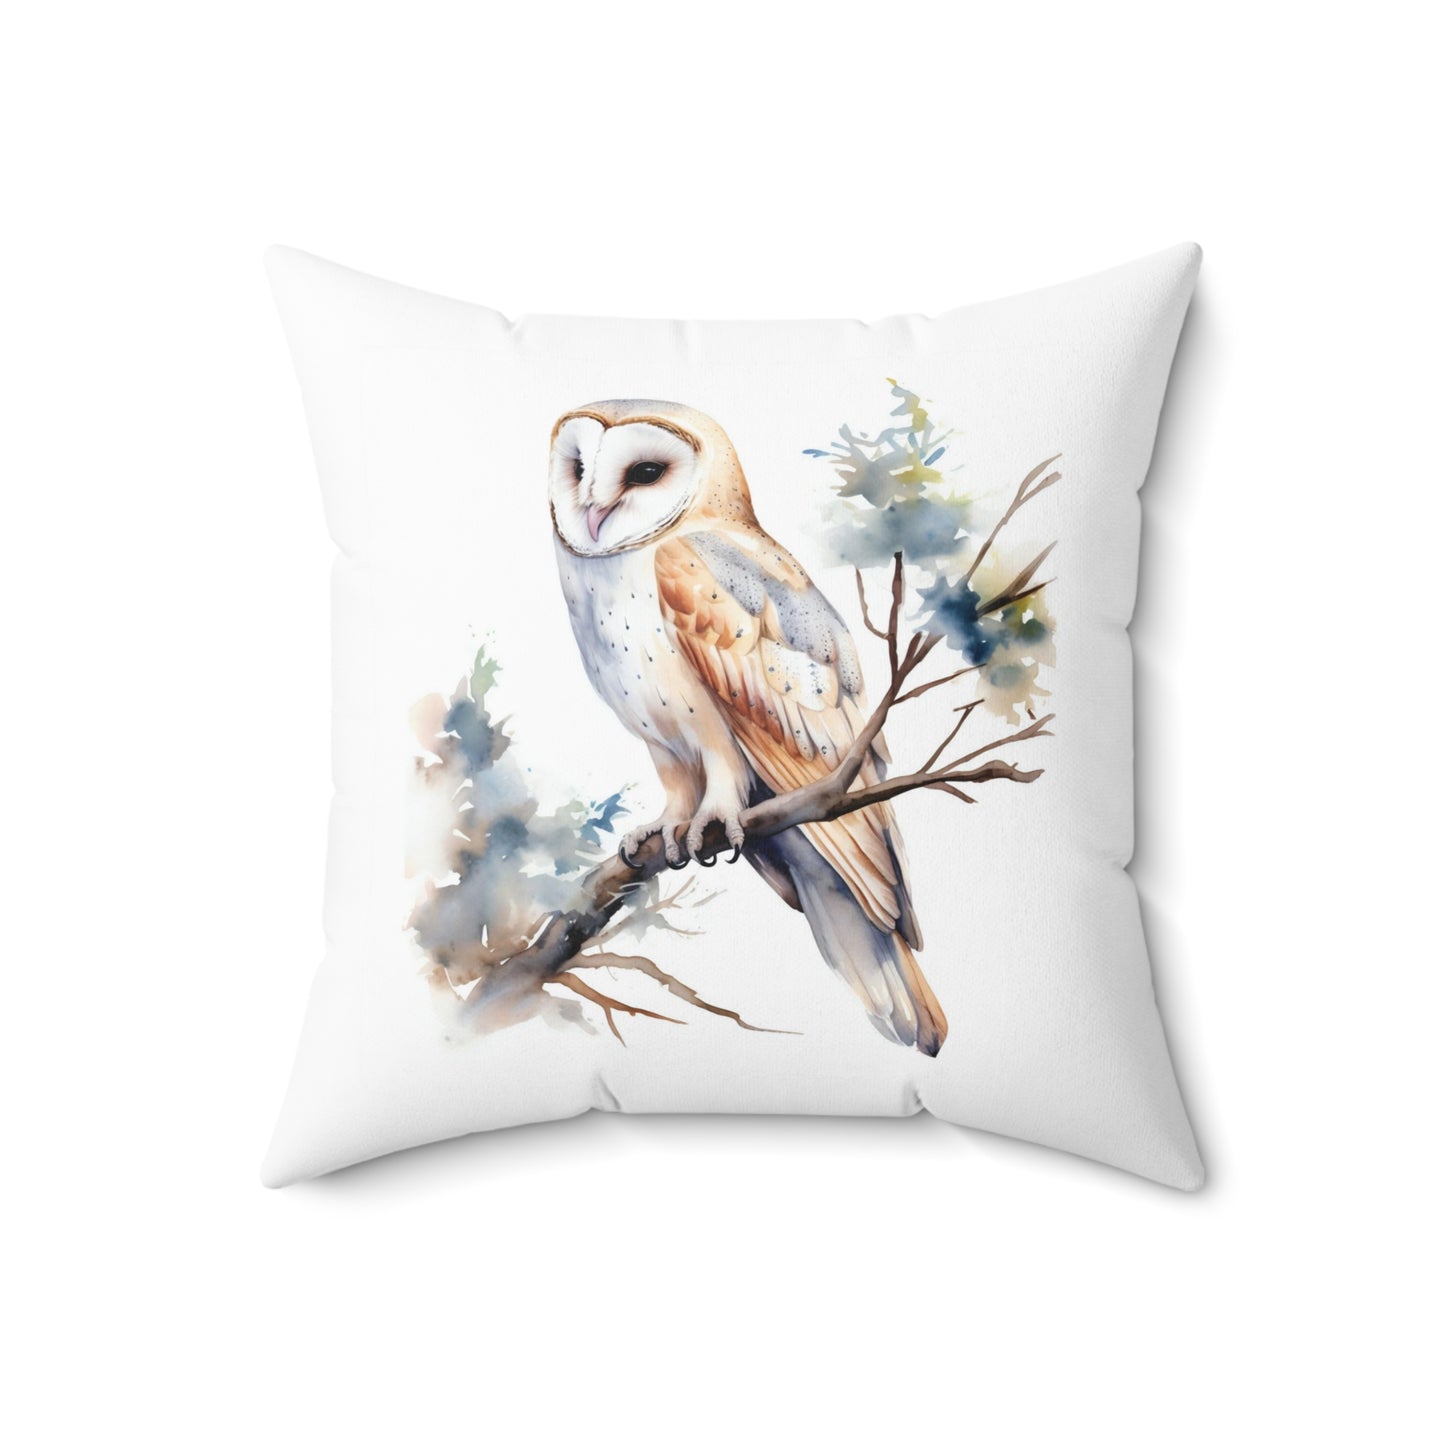 Barn Owl Pillow, Watercolor Barn Owl Throw Pillow, Decorative Pillow, Square Bird Cushion, Double Sided Accent Pillow, Concealed Zipper